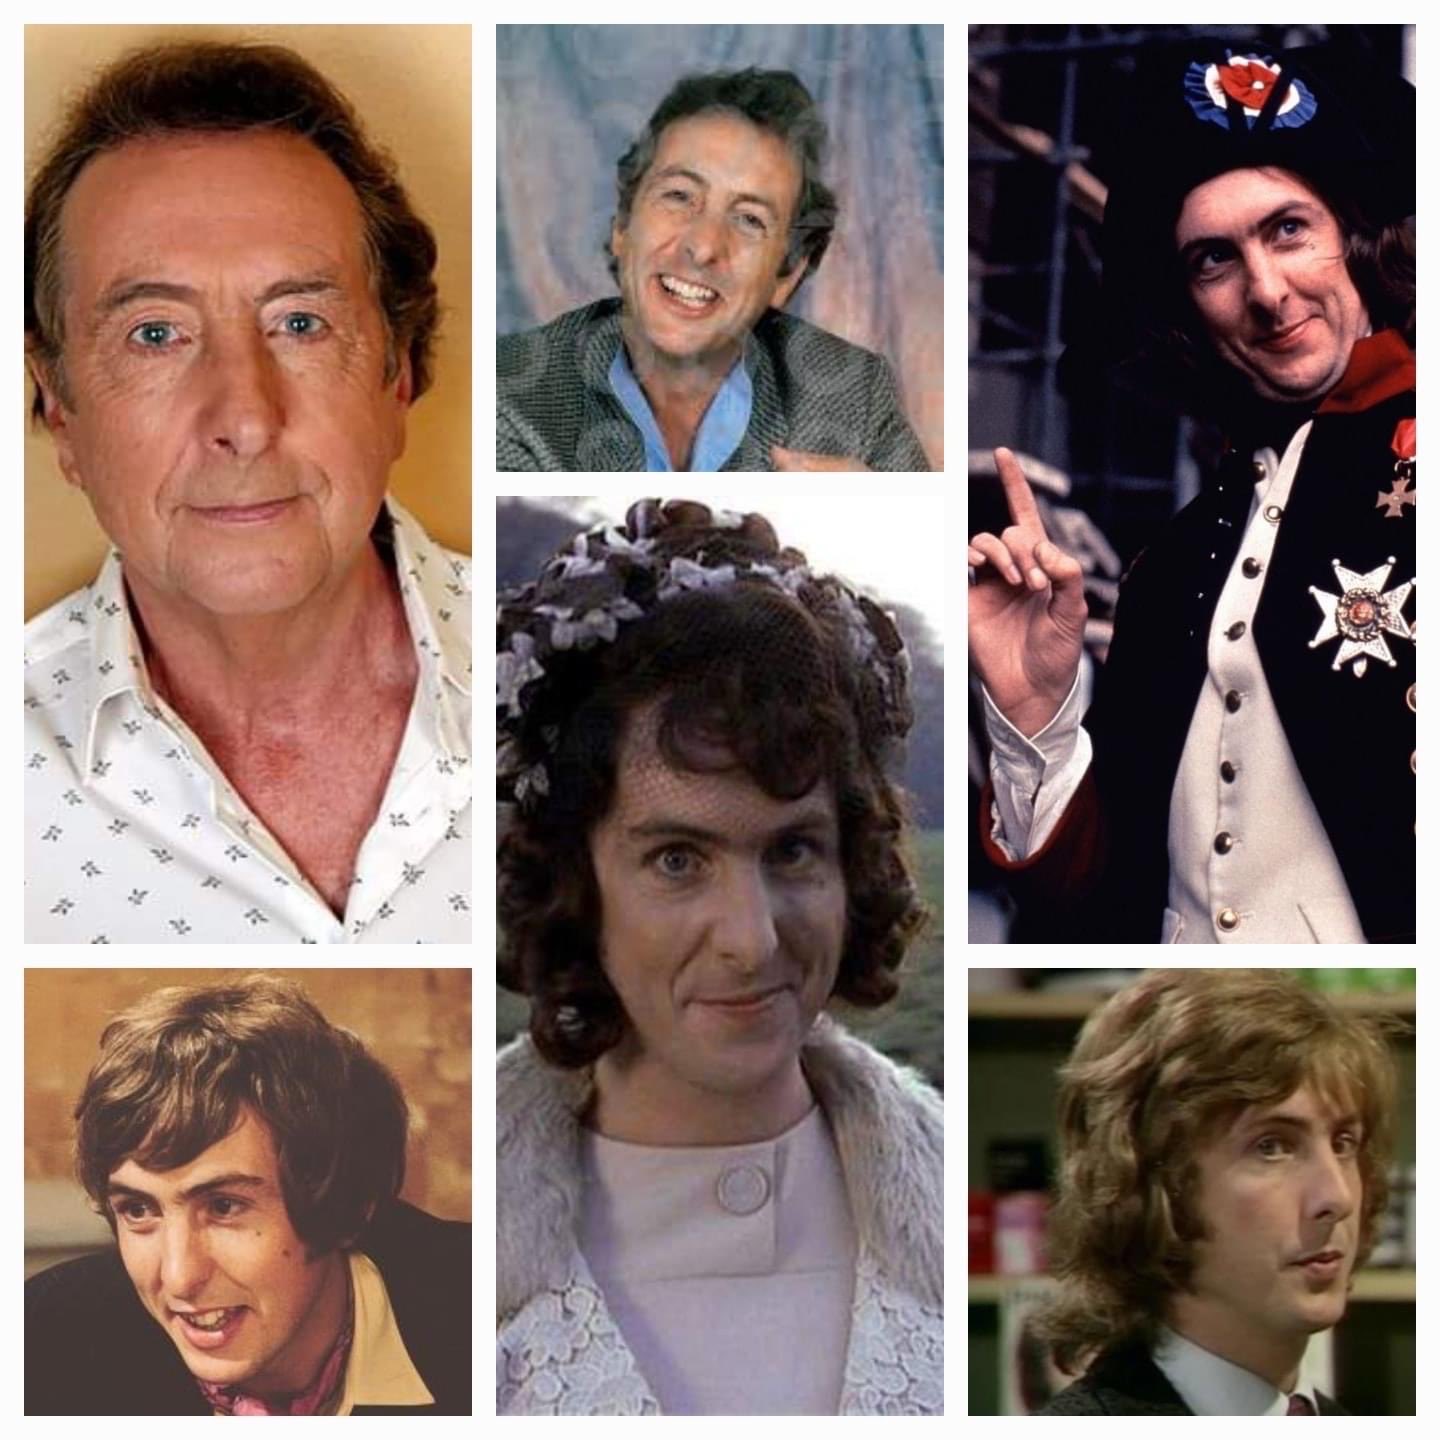 Happy 70th birthday Eric Idle!
The British icon and legend from Monty Phyton! 